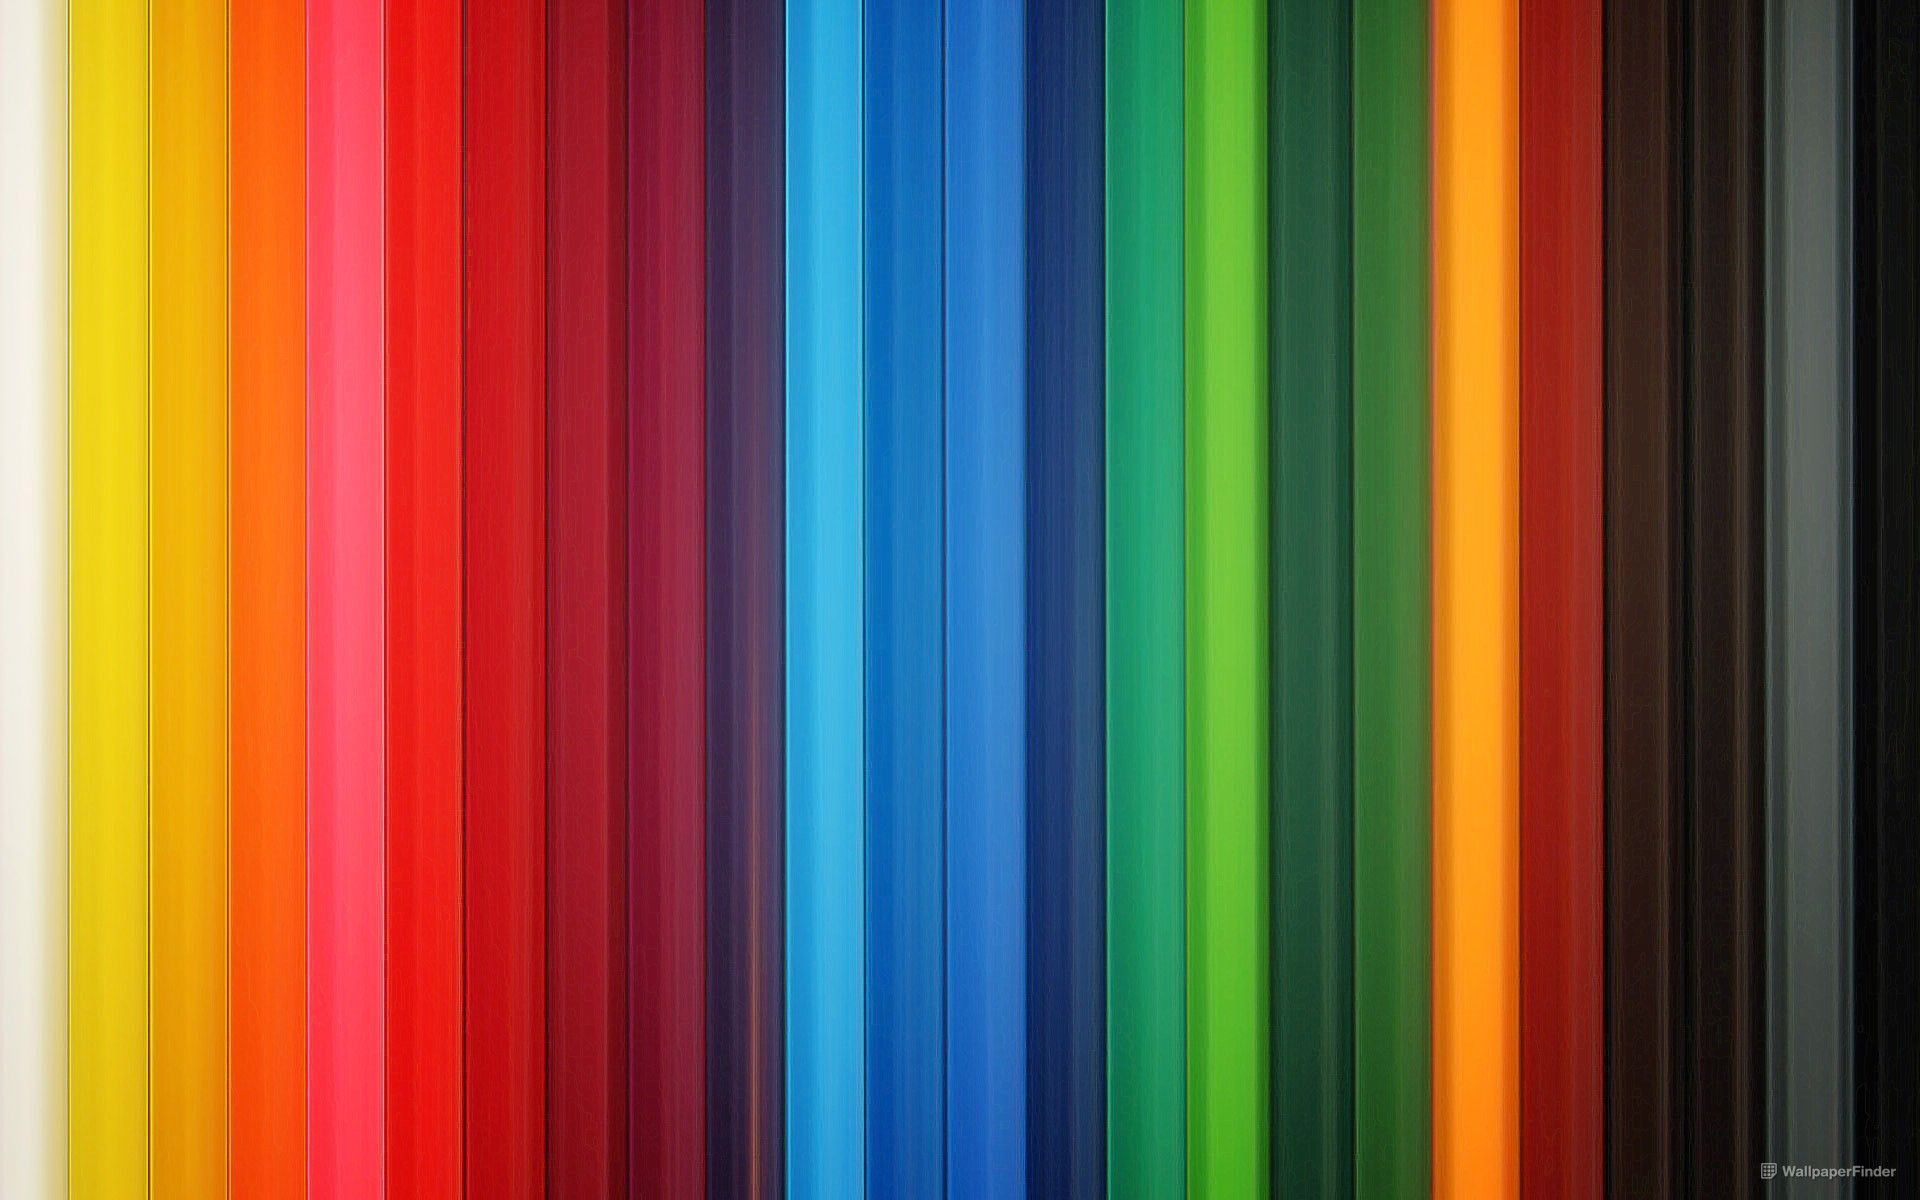 40 Wallpapers loaded with color Webdesigner Depot